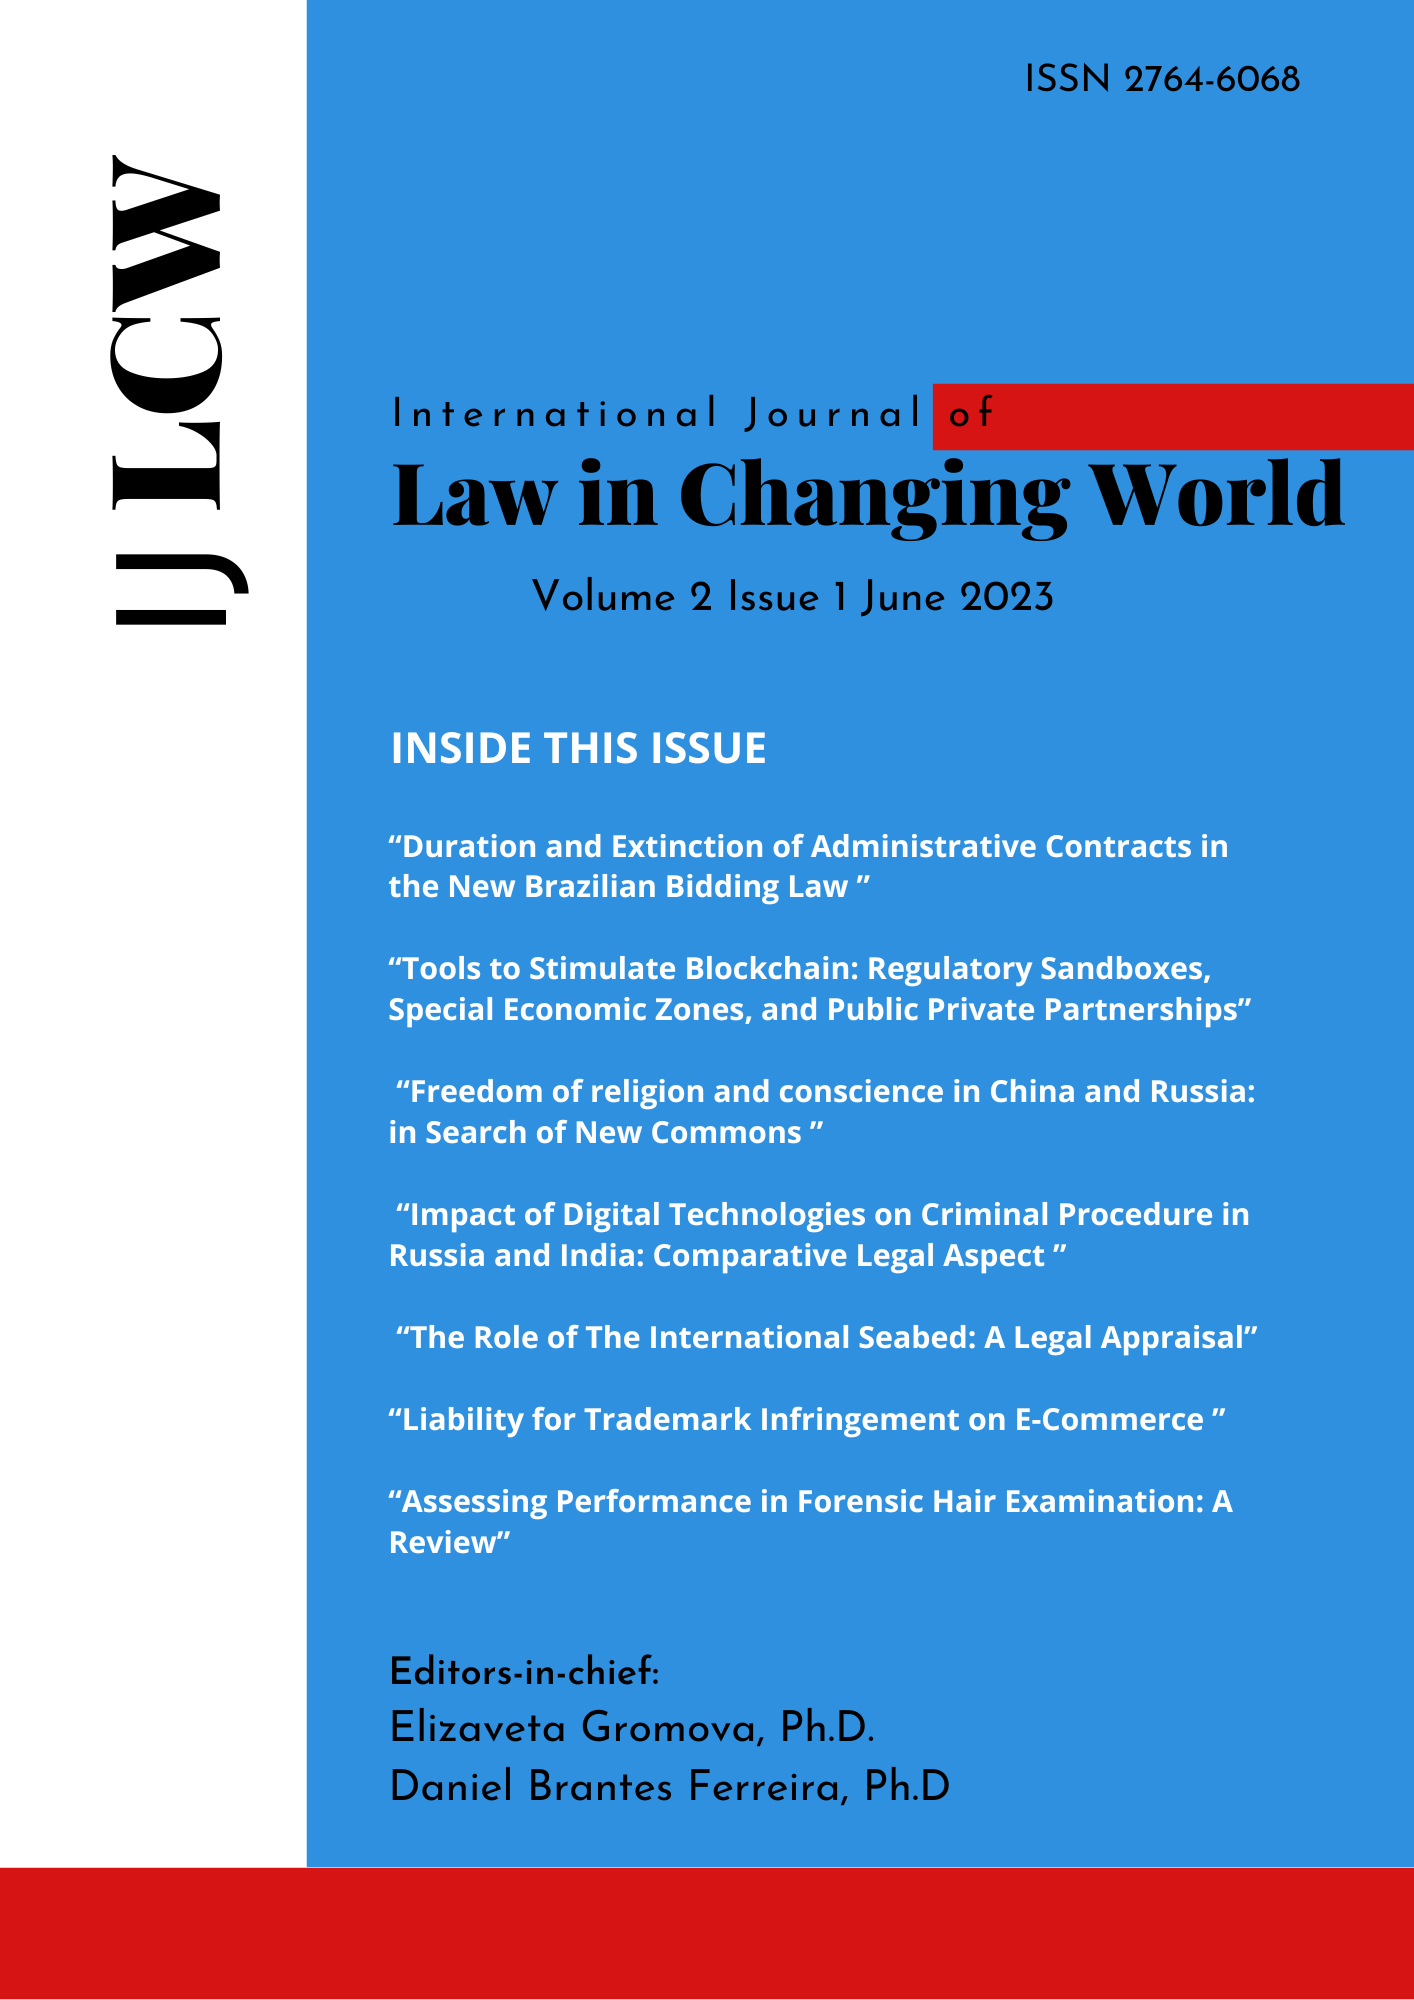 					View Vol. 2 No. 1 (2023): The International Journal of Law in Changing World Issue 1 2023
				